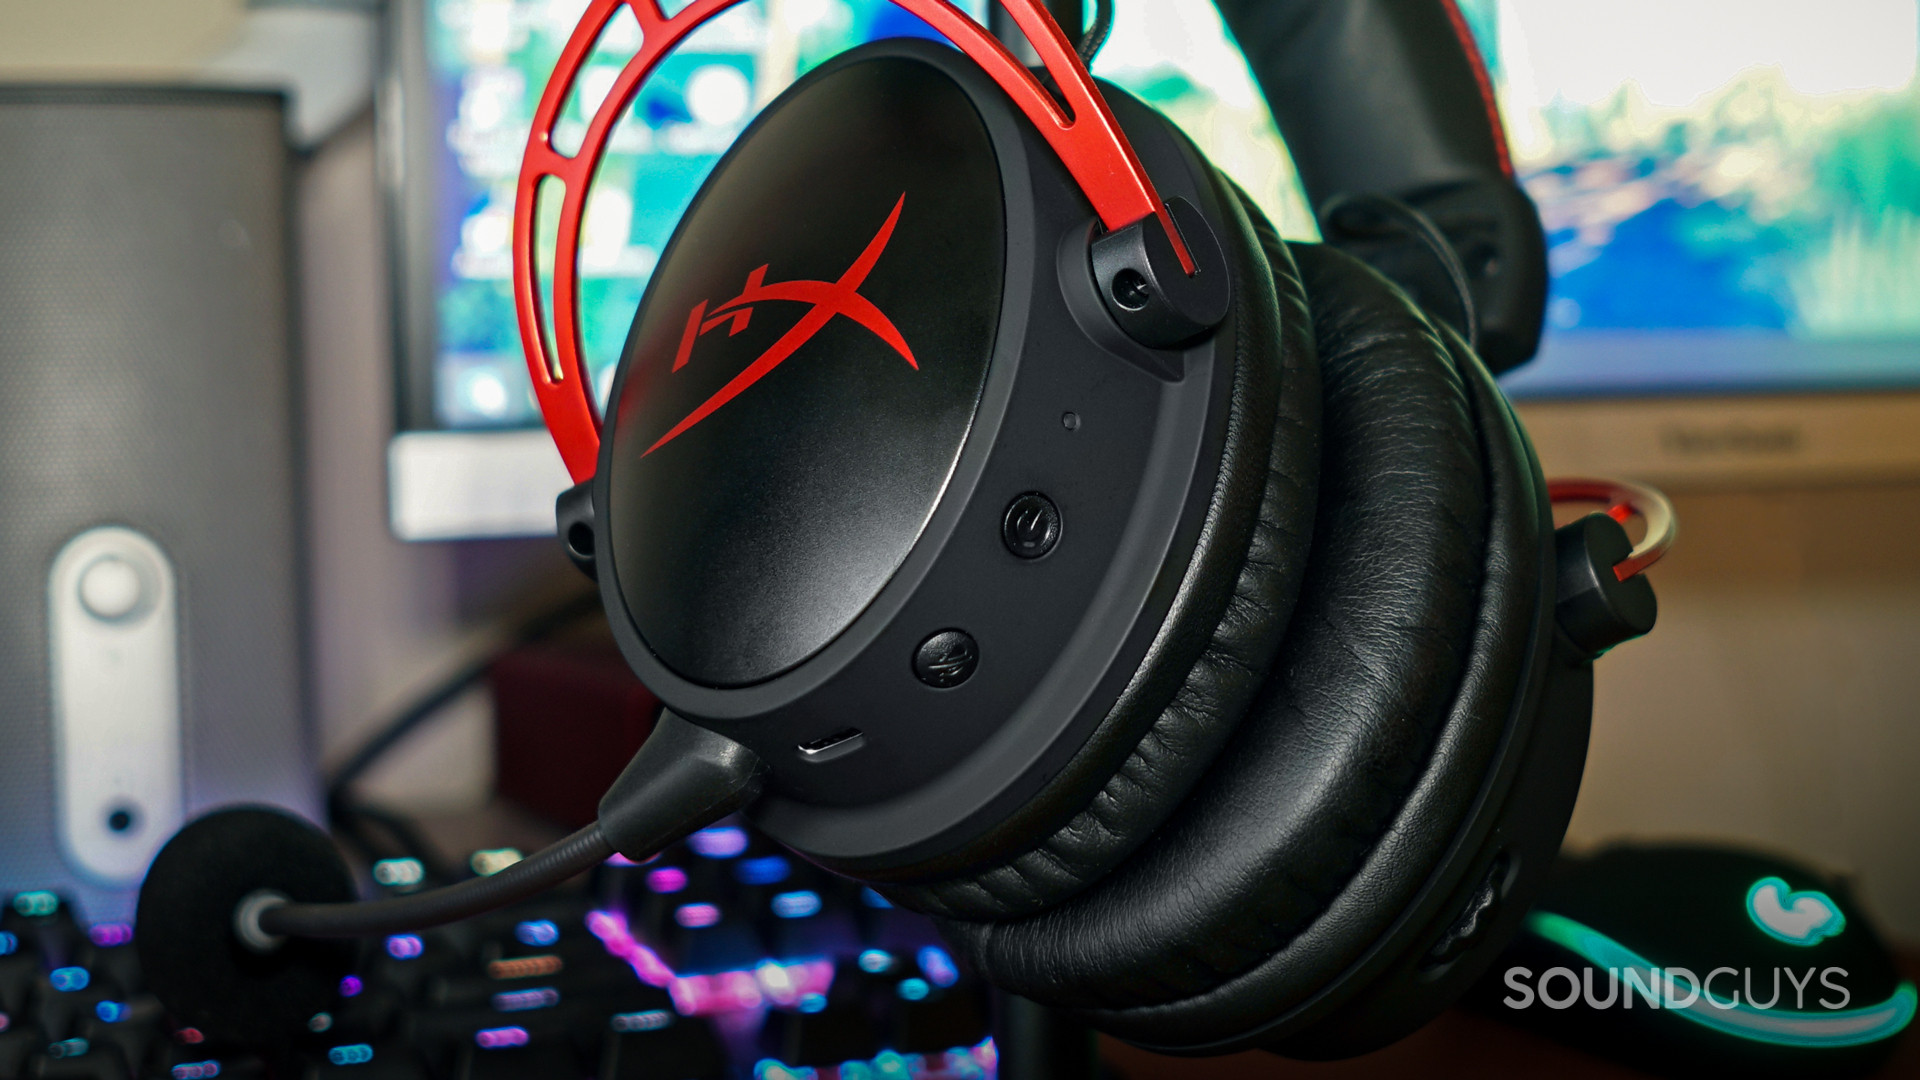 The HyperX Cloud Alpha Wireless sits on a headphone stand in front of a gaming PC.